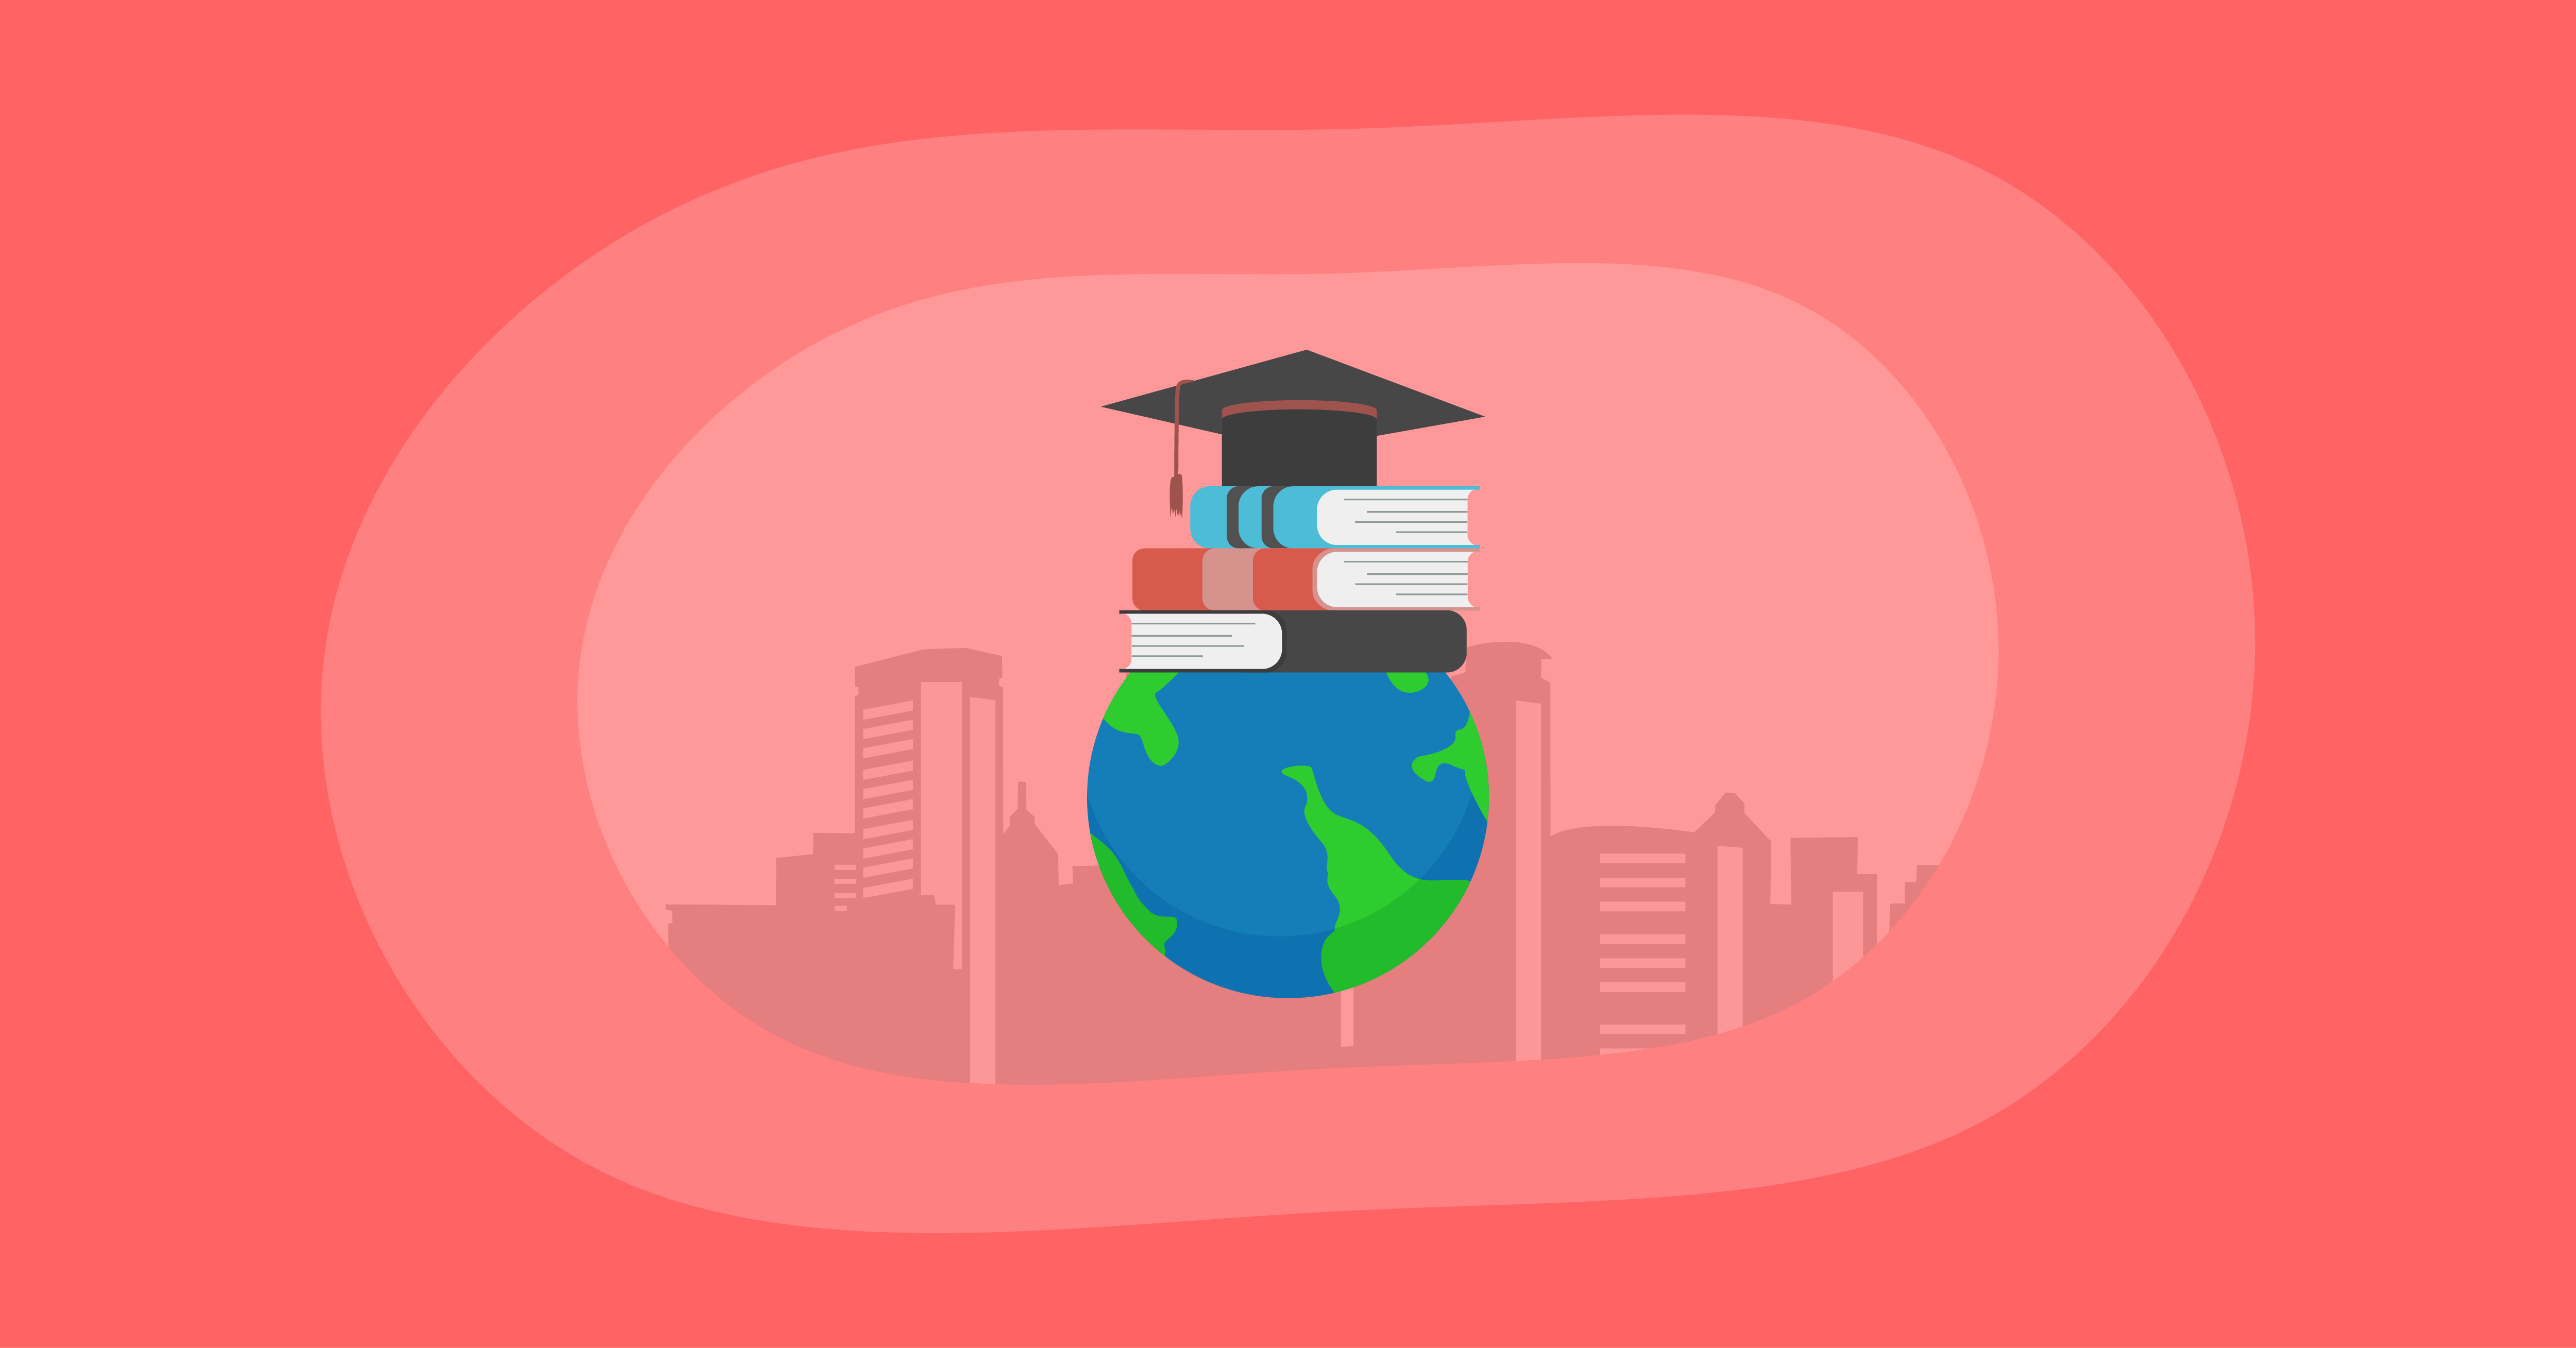 Attempted illustration of global education